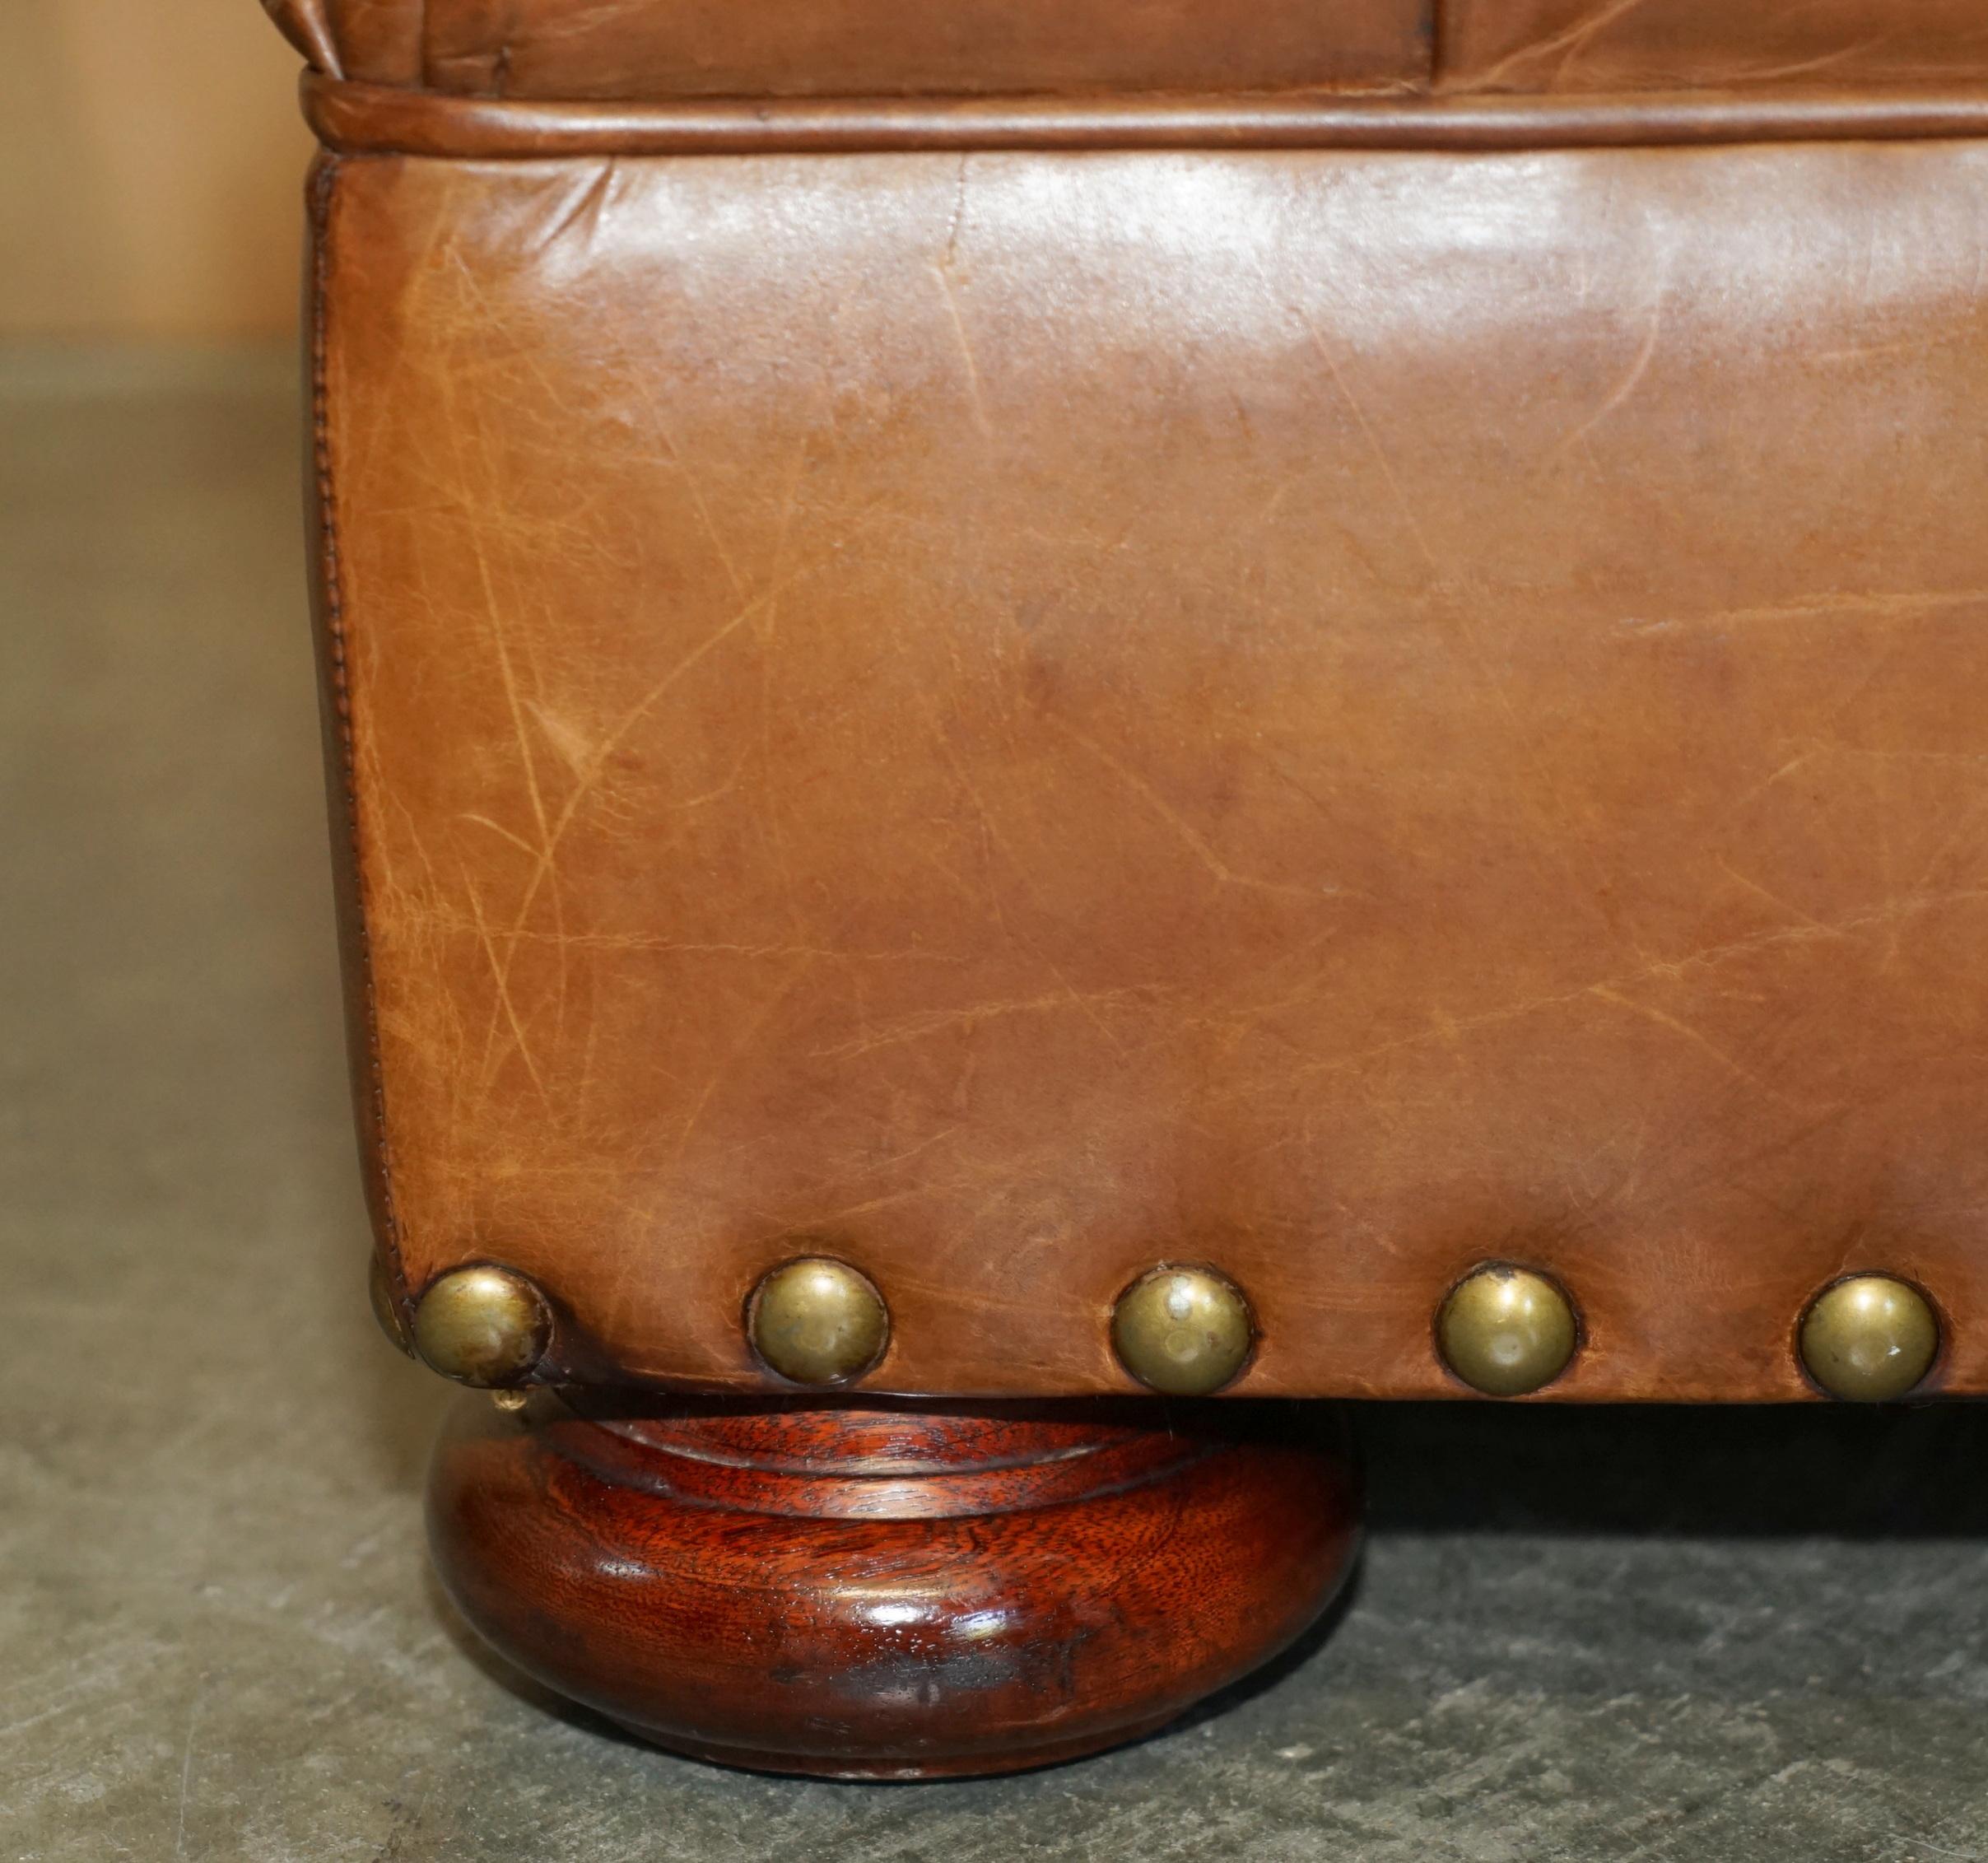 Hand-Crafted RALPH LAUREN WRITER'S CHESTERFIELD FOOTSTOOL OTTOMAN IN HERiTAGE BROWN LEATHER